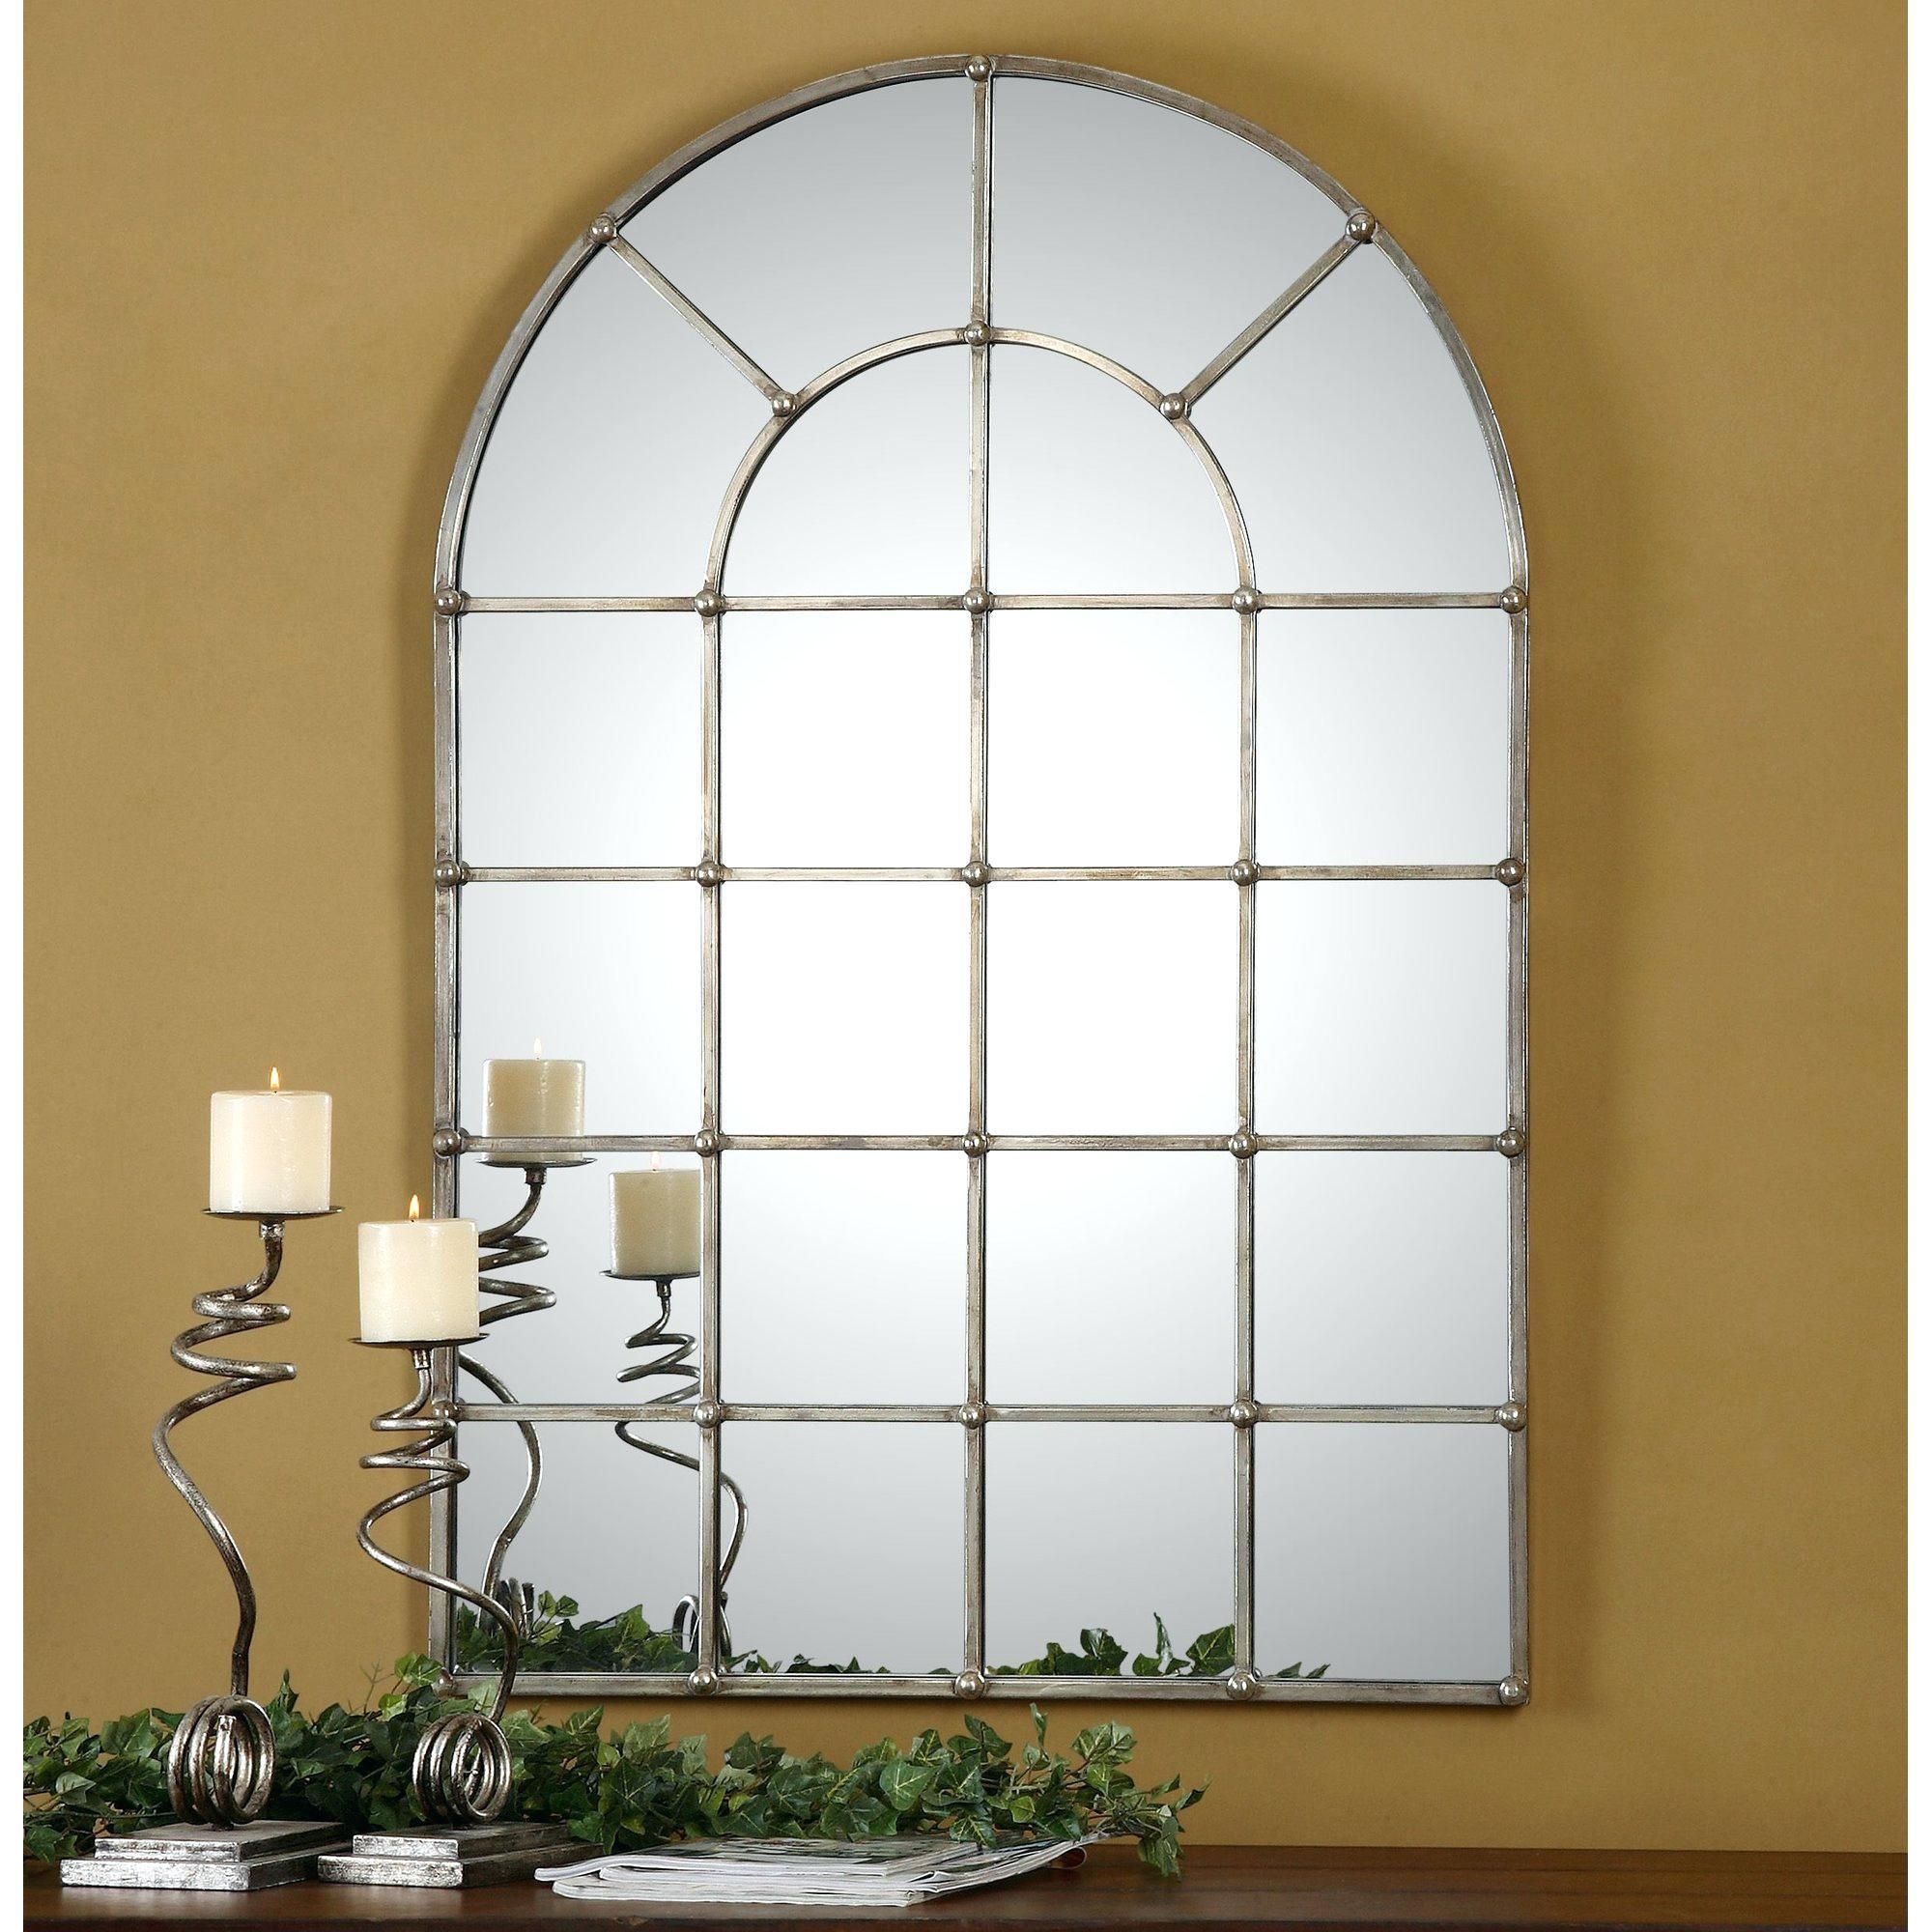 Wall Mirror Shabby Chic Arched Window Panes 24 X 16Arch Garden Pertaining To Metal Garden Mirror (Photo 18 of 20)